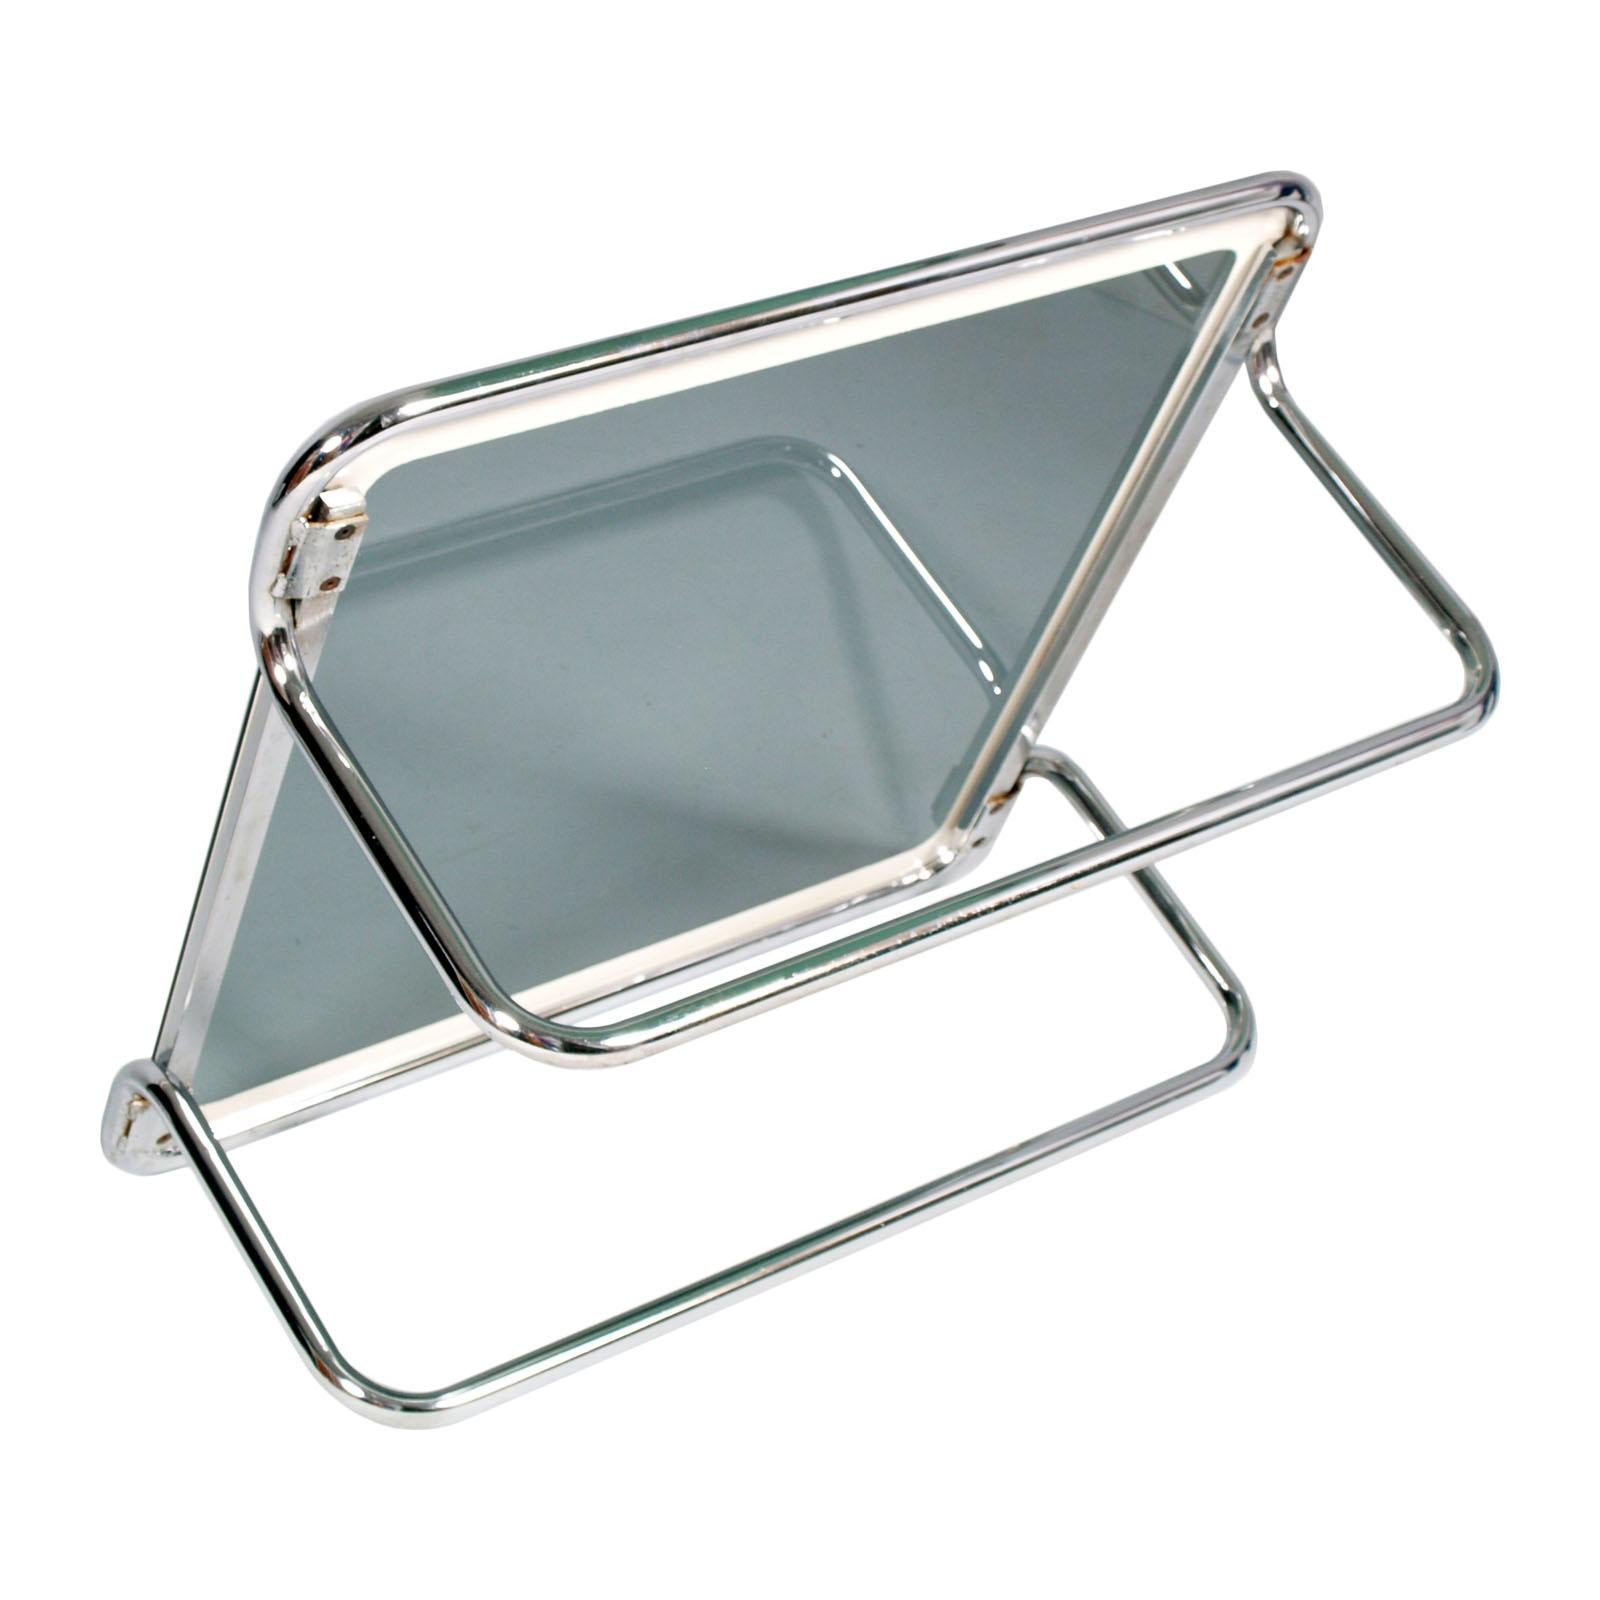 Galvanized Italian 1960s Chrome & Glass Cocktail Table, Designer Giotto Stoppino Attributed For Sale